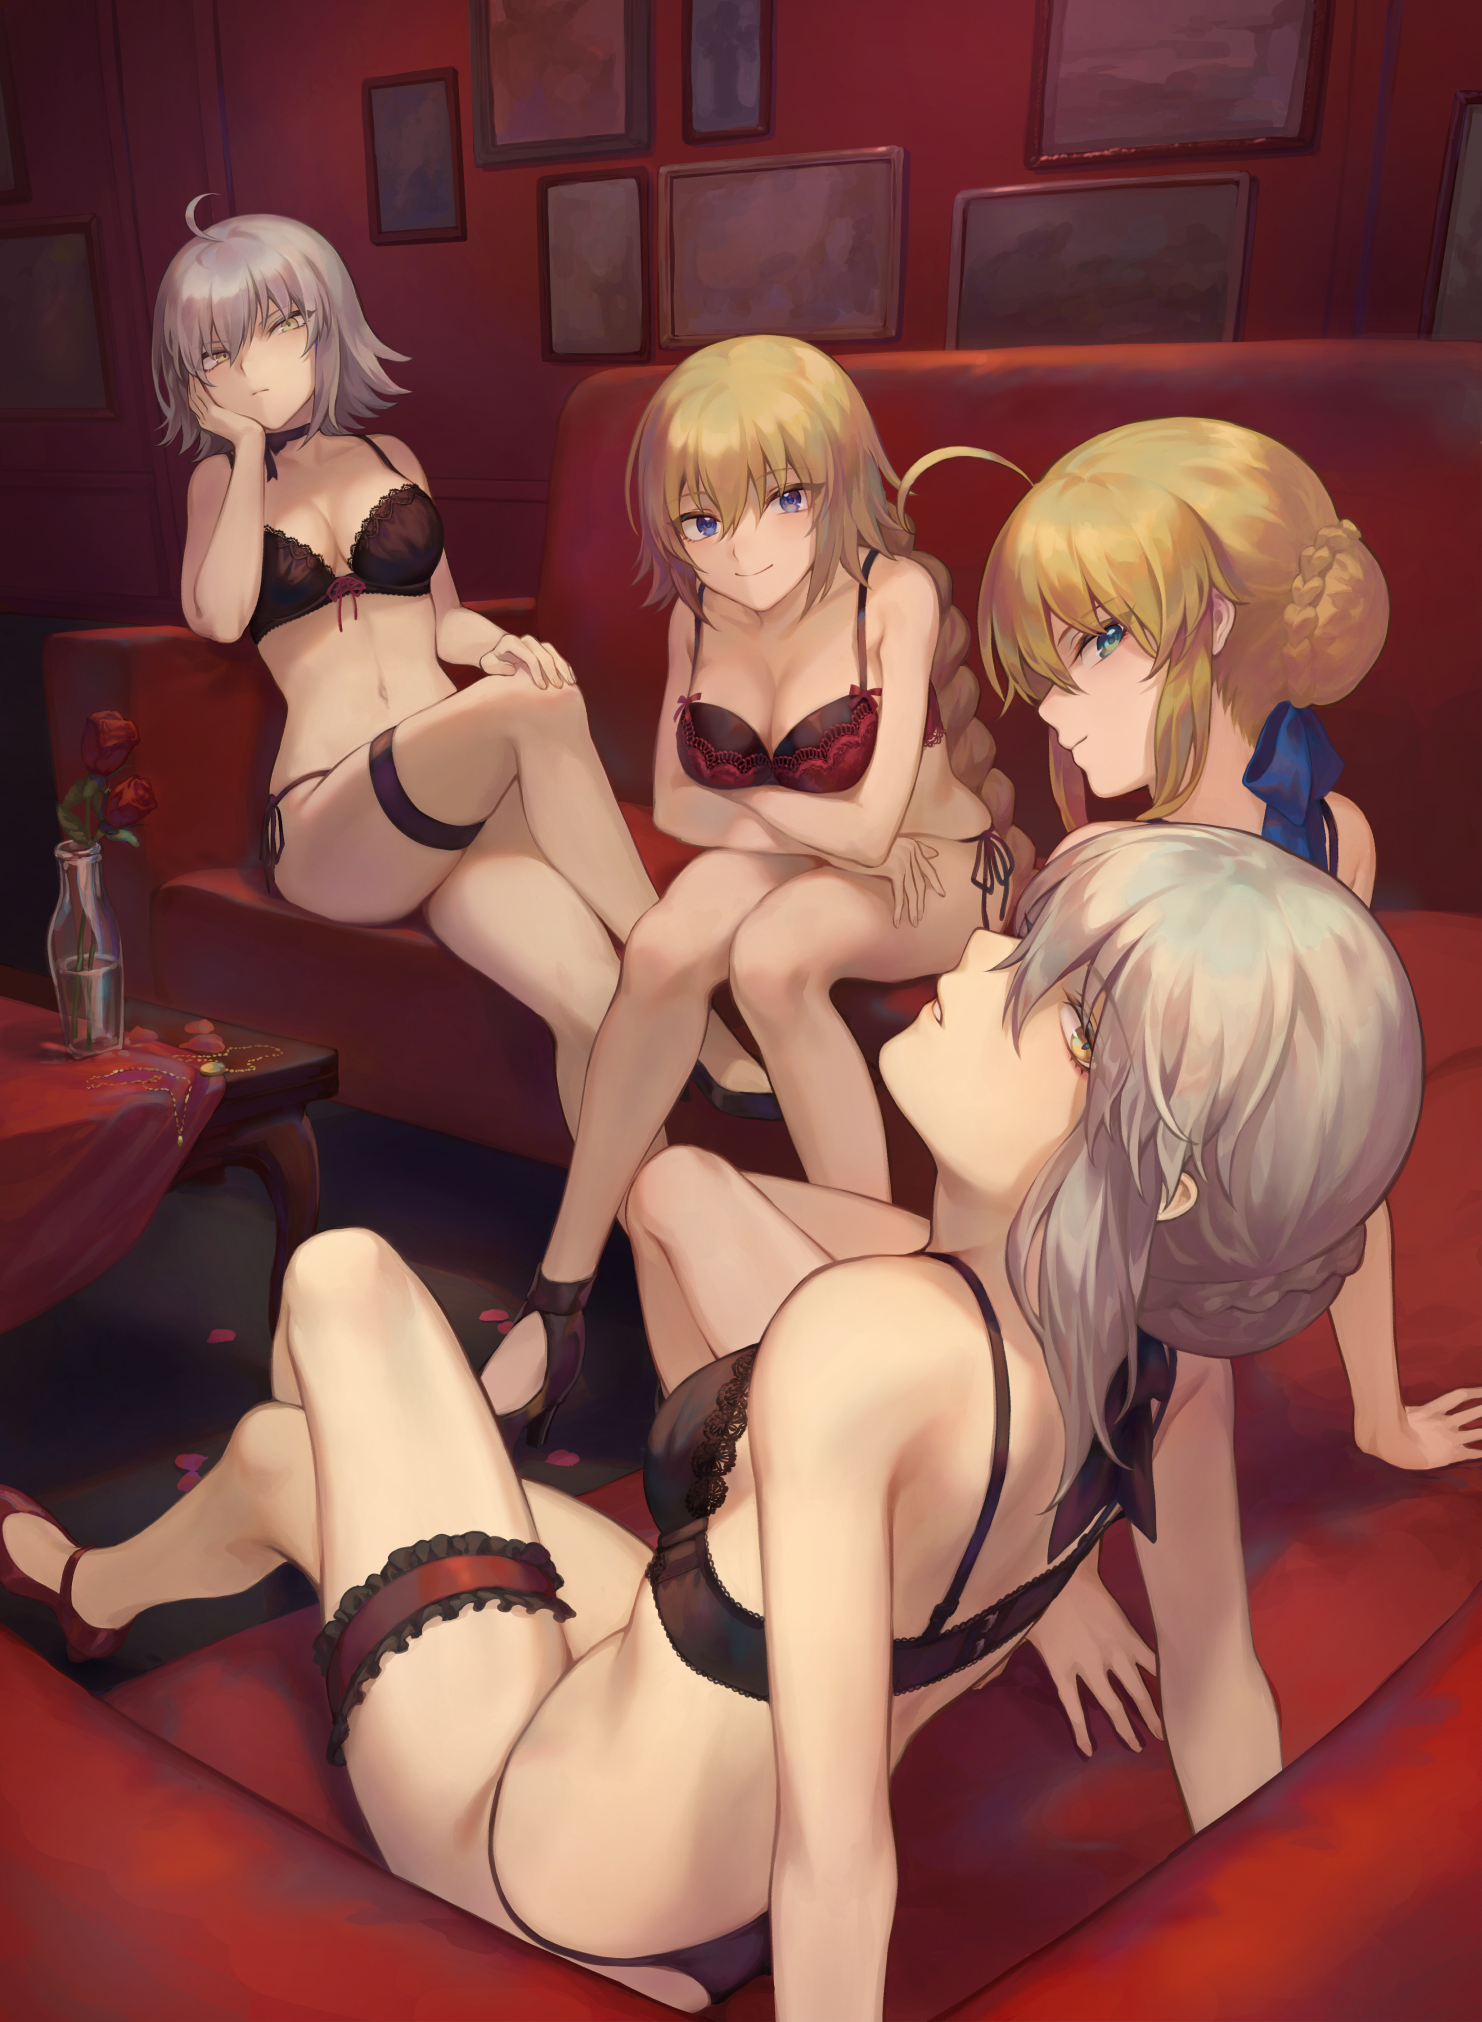 Anime 1482x2022 anime anime girls digital art artwork portrait display boobs big boobs small boobs long hair short hair Fate/Grand Order Jeanne (Alter) (Fate/Grand Order) Jeanne d'Arc (Fate) Artoria Pendragon Fate/Apocrypha  Fate series Fate/Stay Night fate/stay night: heaven's feel gray hair blonde green eyes blue eyes bra black bras rose room panties black panties couch underwear cleavage Saber Alter Saber Mashu 003